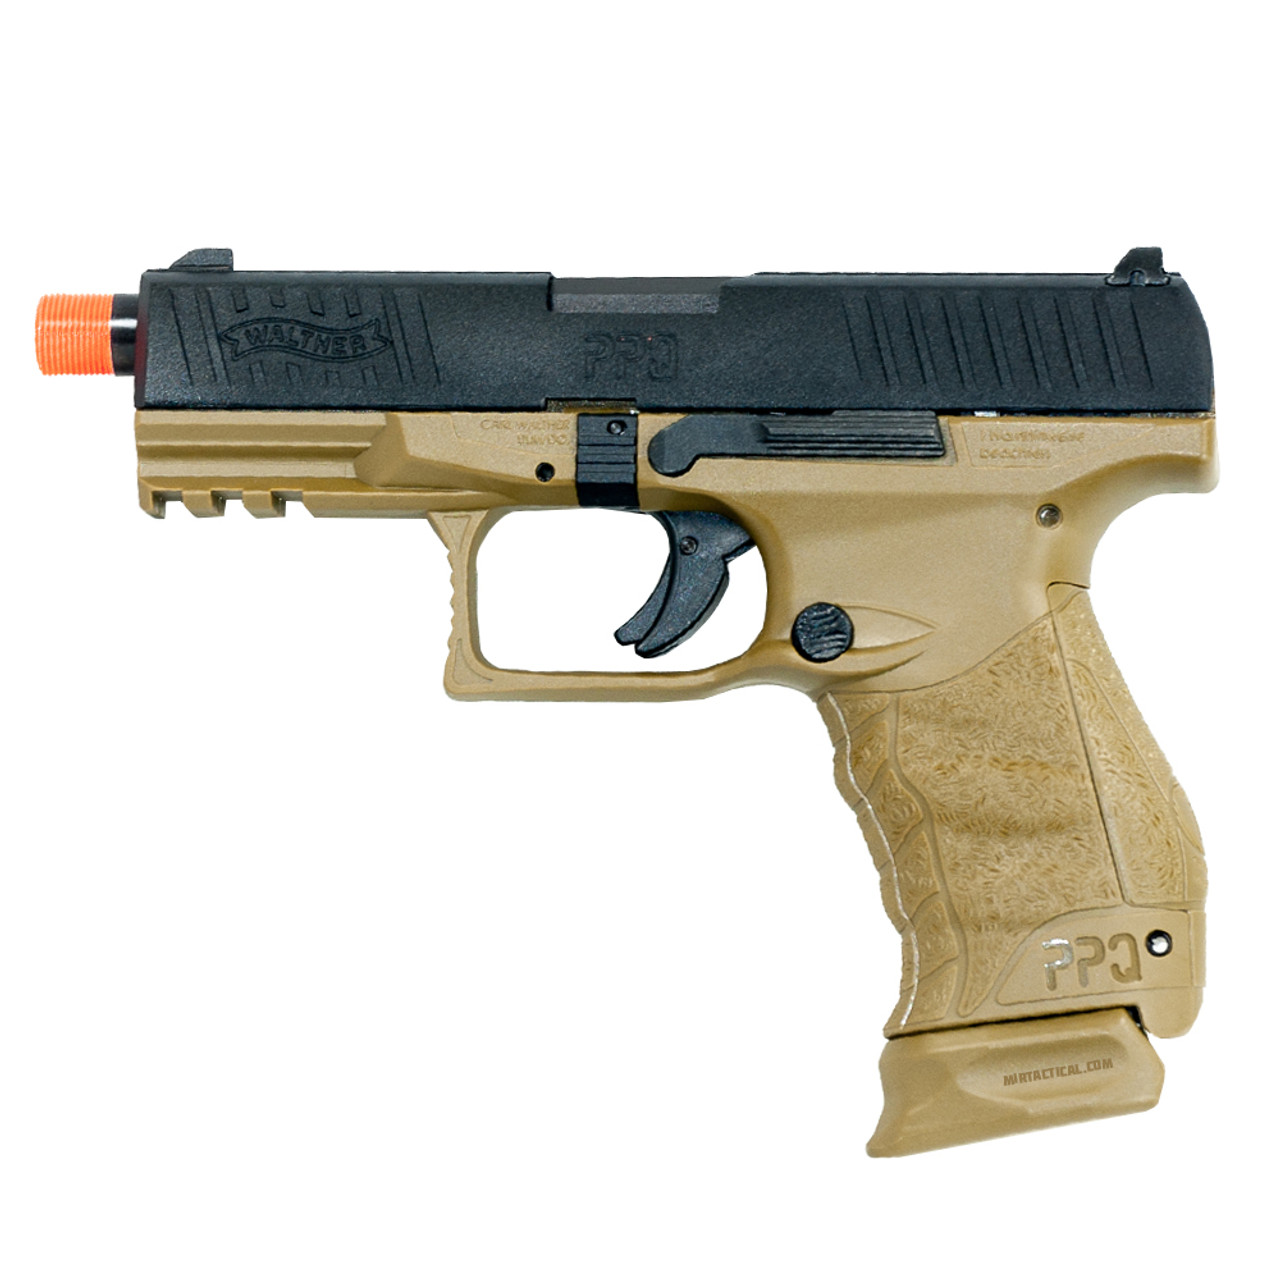 UMAREX WALTHER PPQ M2 CO2 BLOWBACK AIRSOFT PISTOL - FDE low price of $93.49